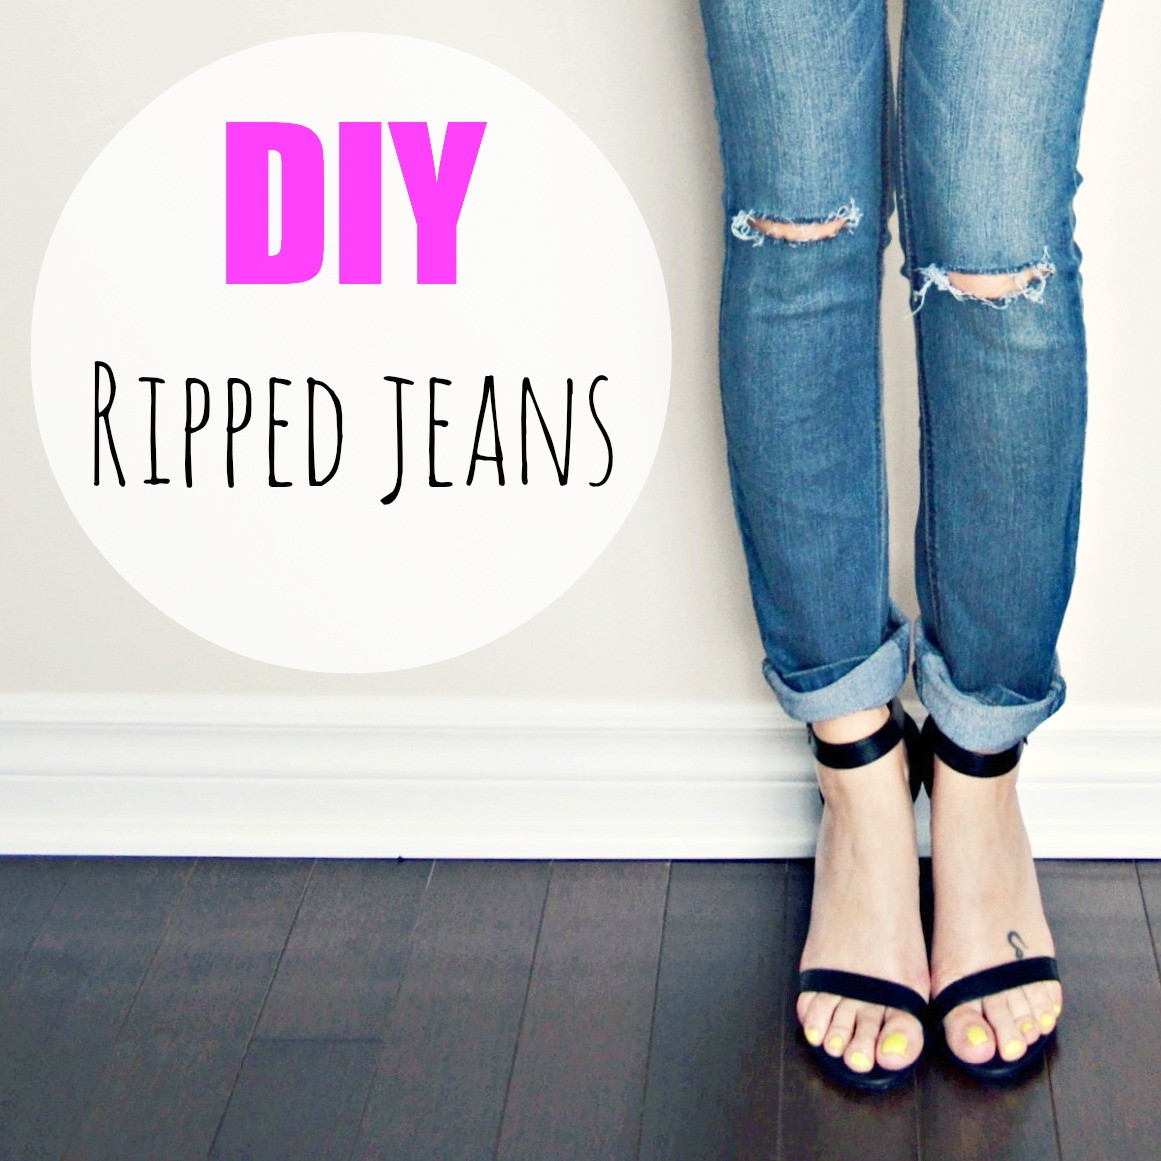 Diy Ripped Jeans
 DIY ripped jeans Archives